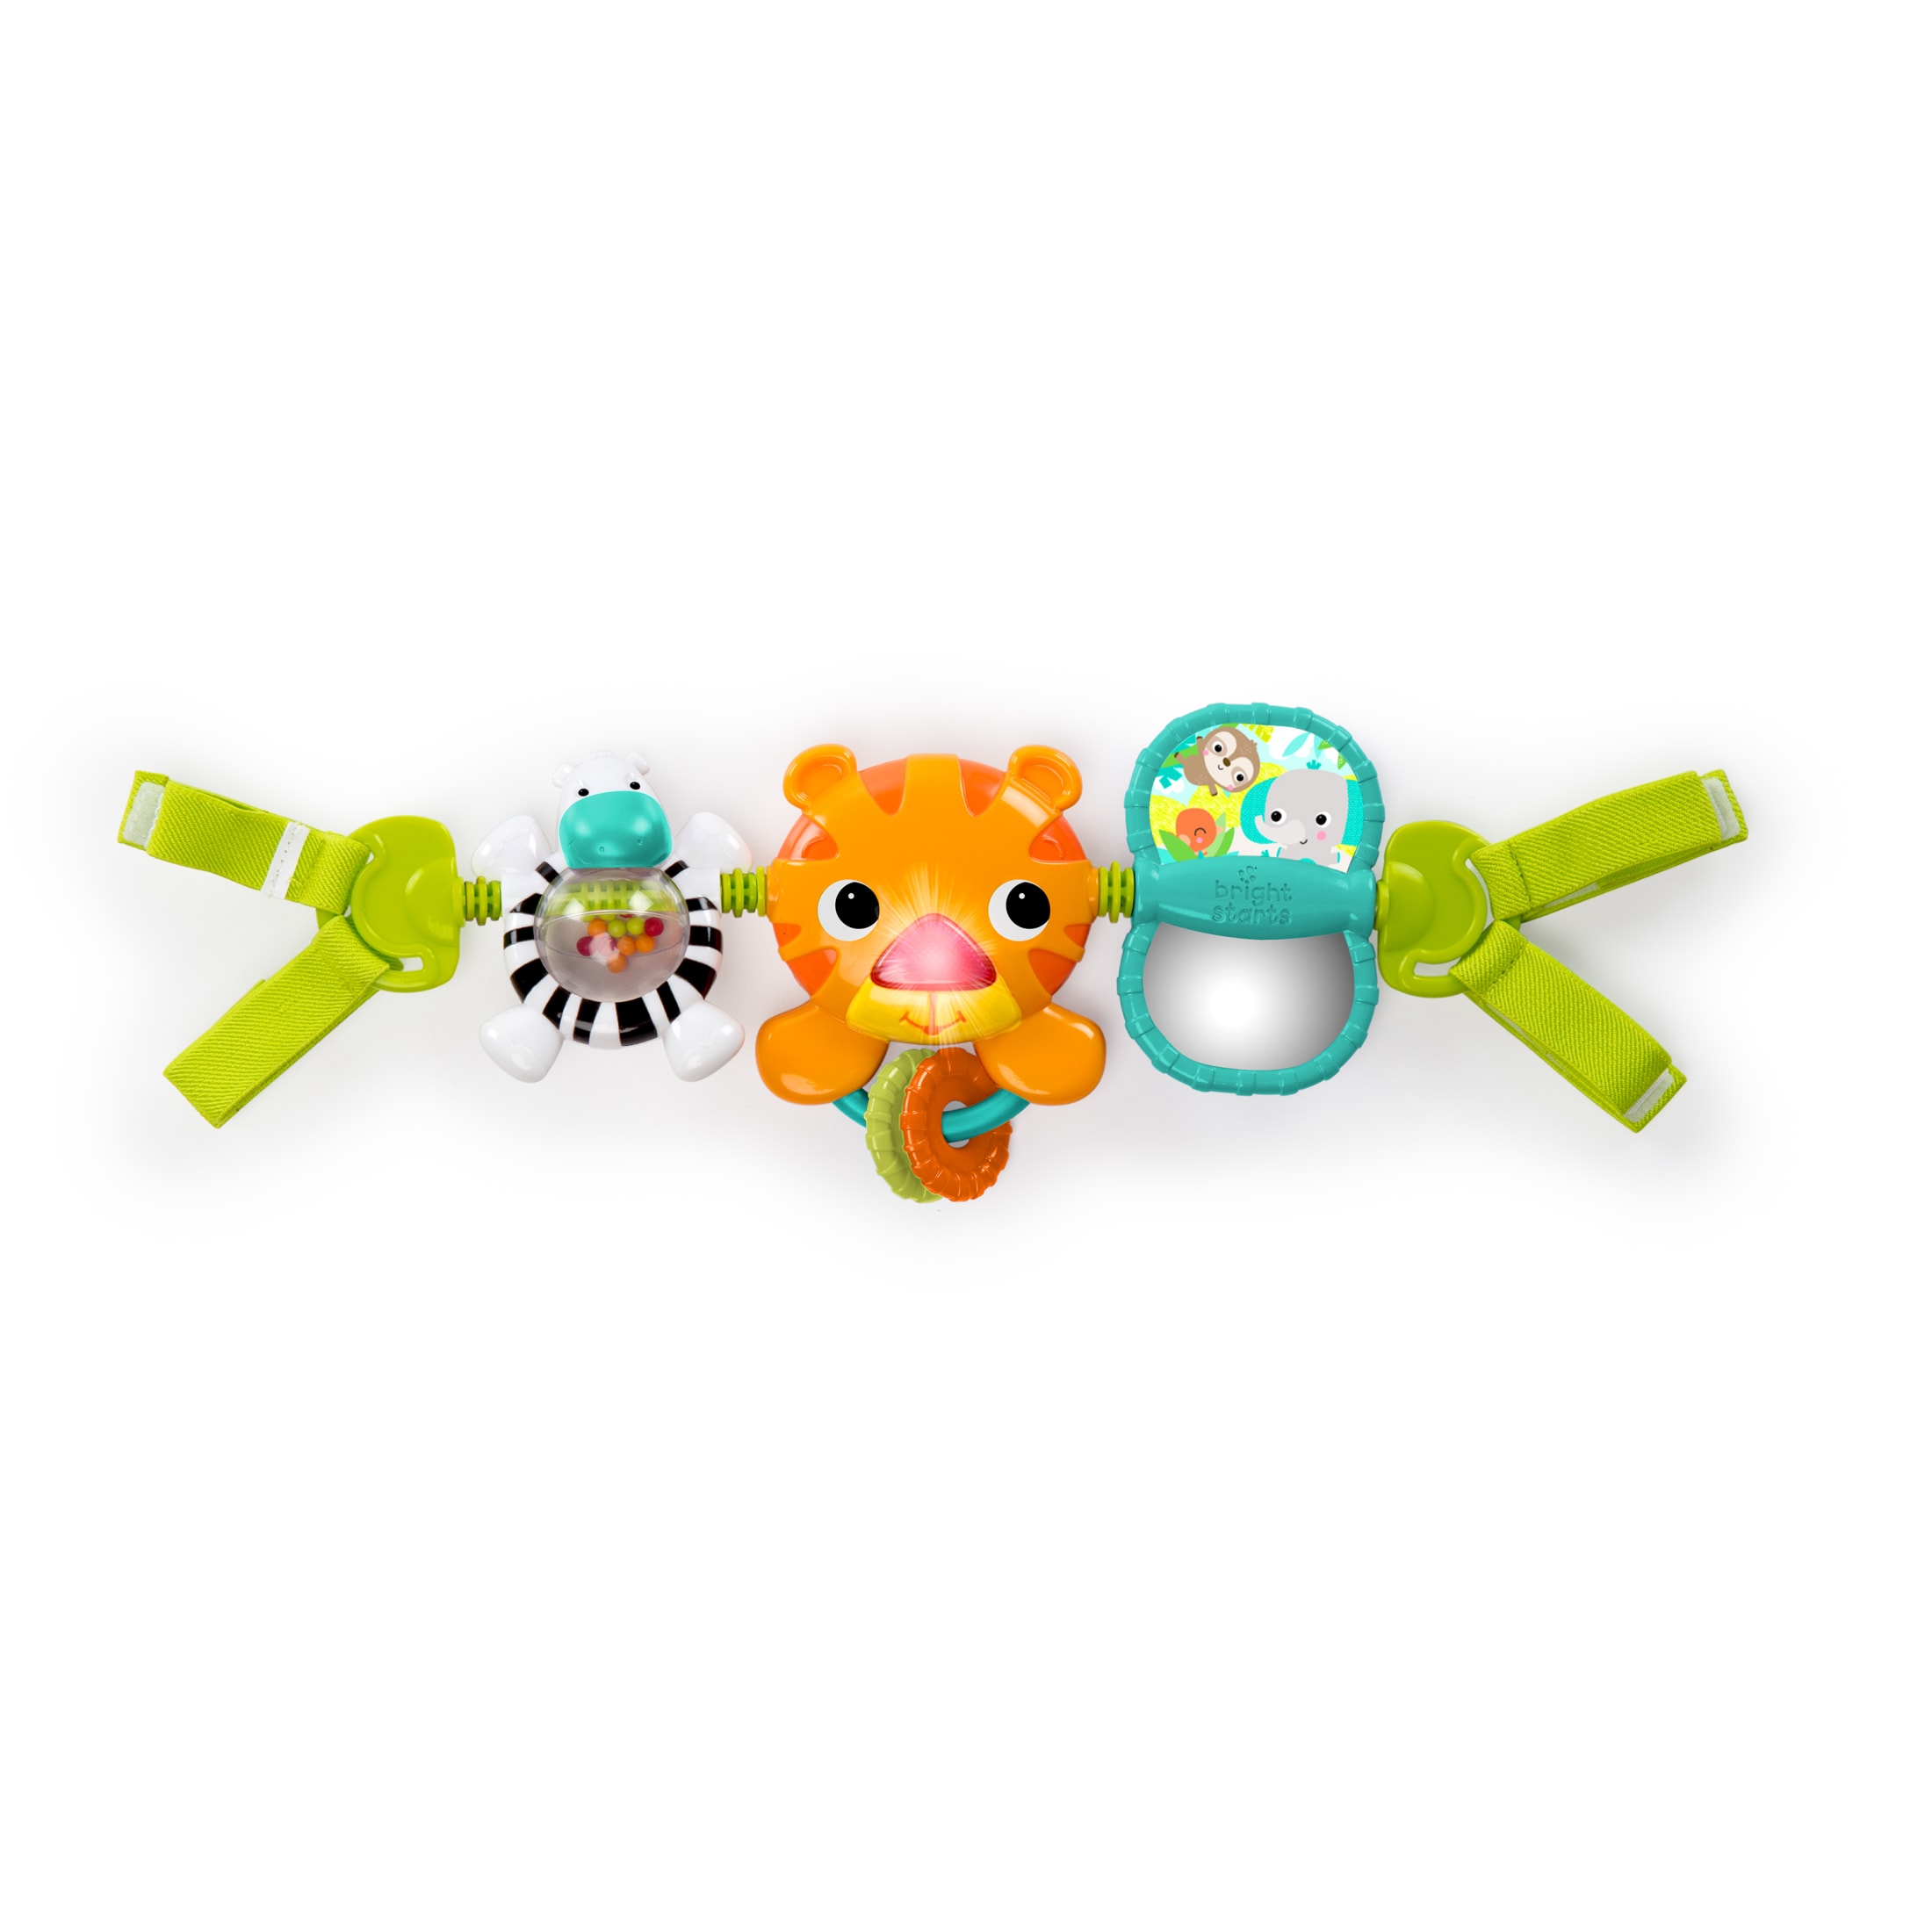 Bright Starts Take Along Musical Carrier Activity Toy Bar, Ages Newborn + - image 1 of 8